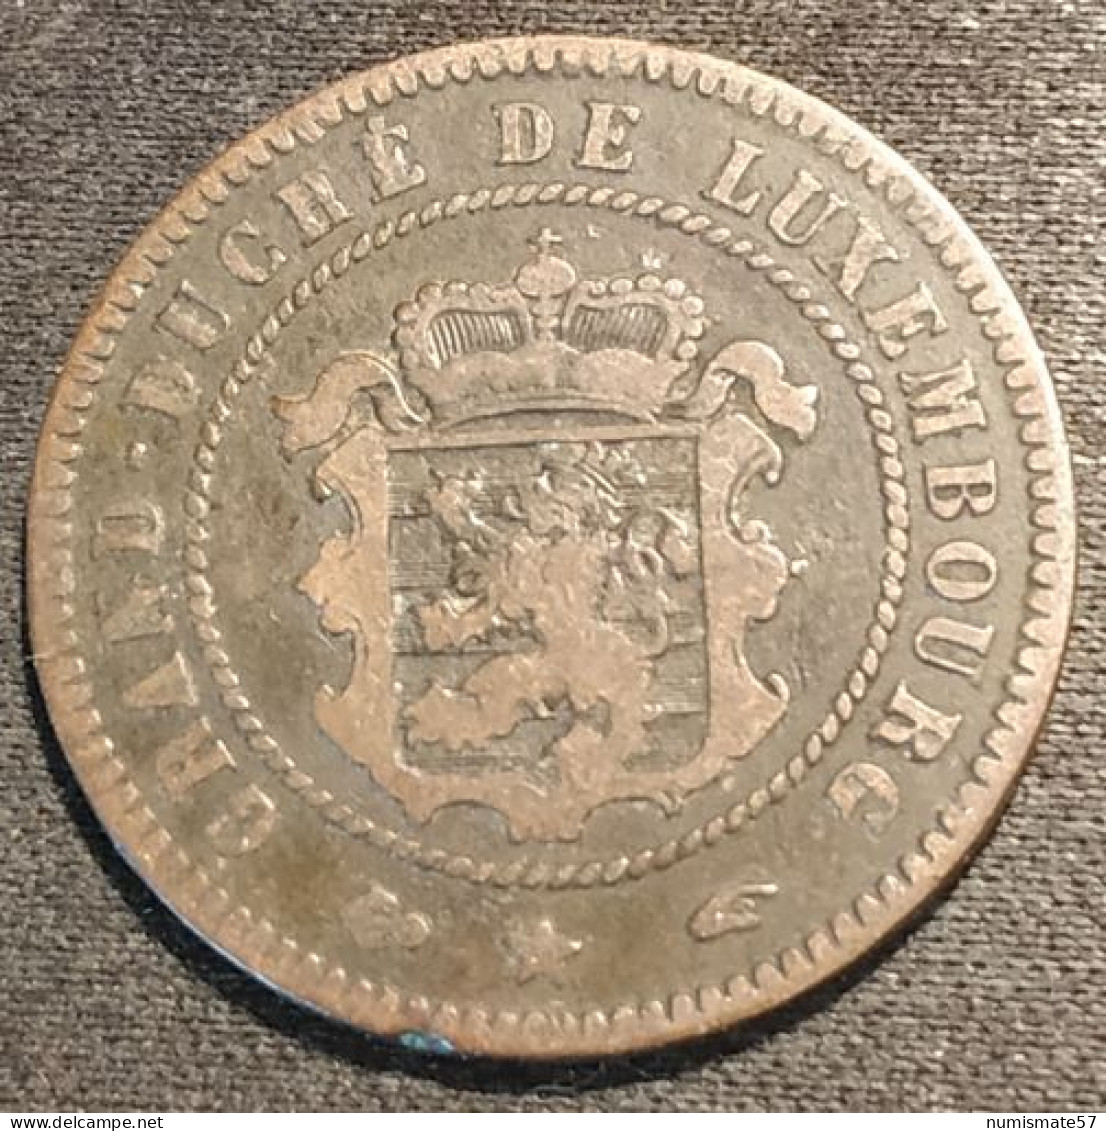 LUXEMBOURG - 5 CENTIMES 1855 - Guillaume III - KM 22 - Lussemburgo